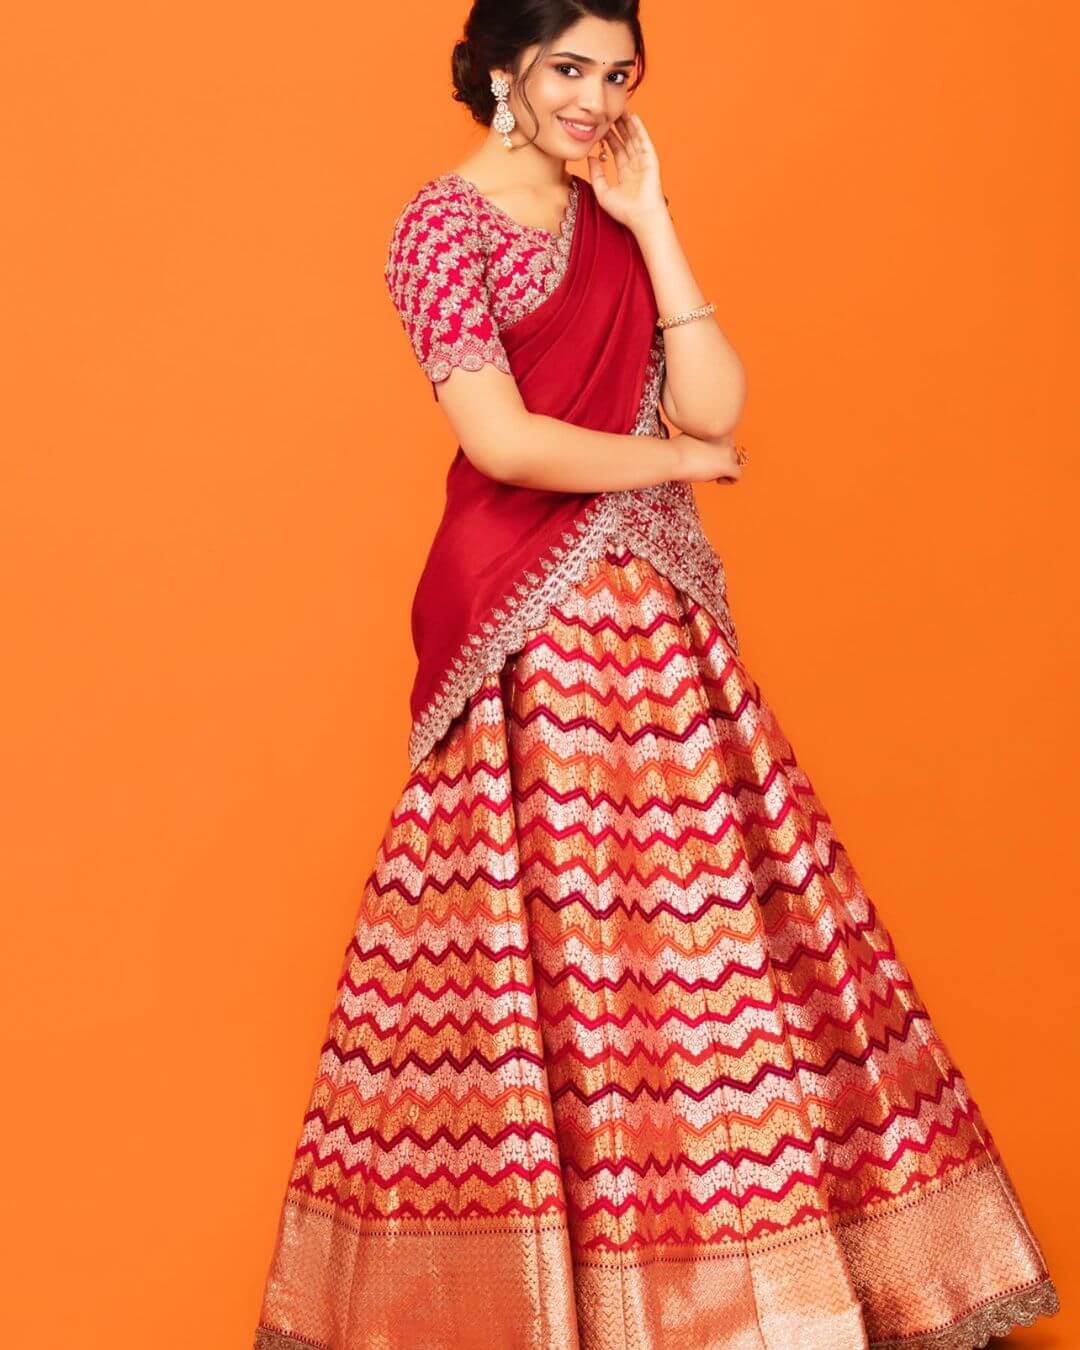 Krithi Shetty Look Beautiful In Red Lehenga Outfit Krithi Shetty Setting Some Major Traditional and Ethnic Outfit Look Inspo